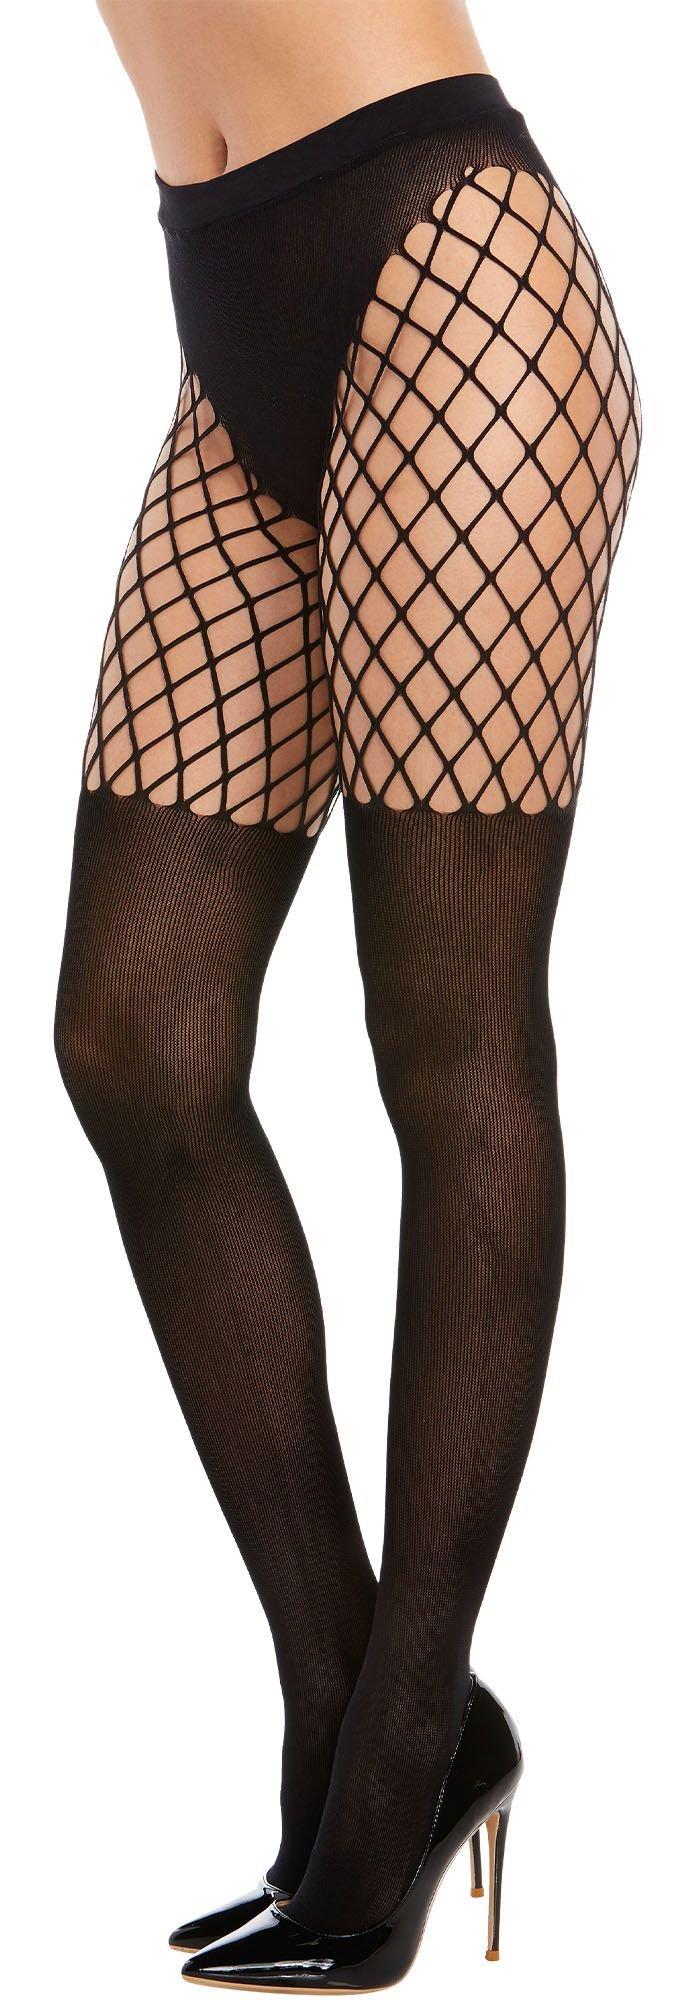 Black Opaque Pantyhose for Adults with Fishnet Thigh